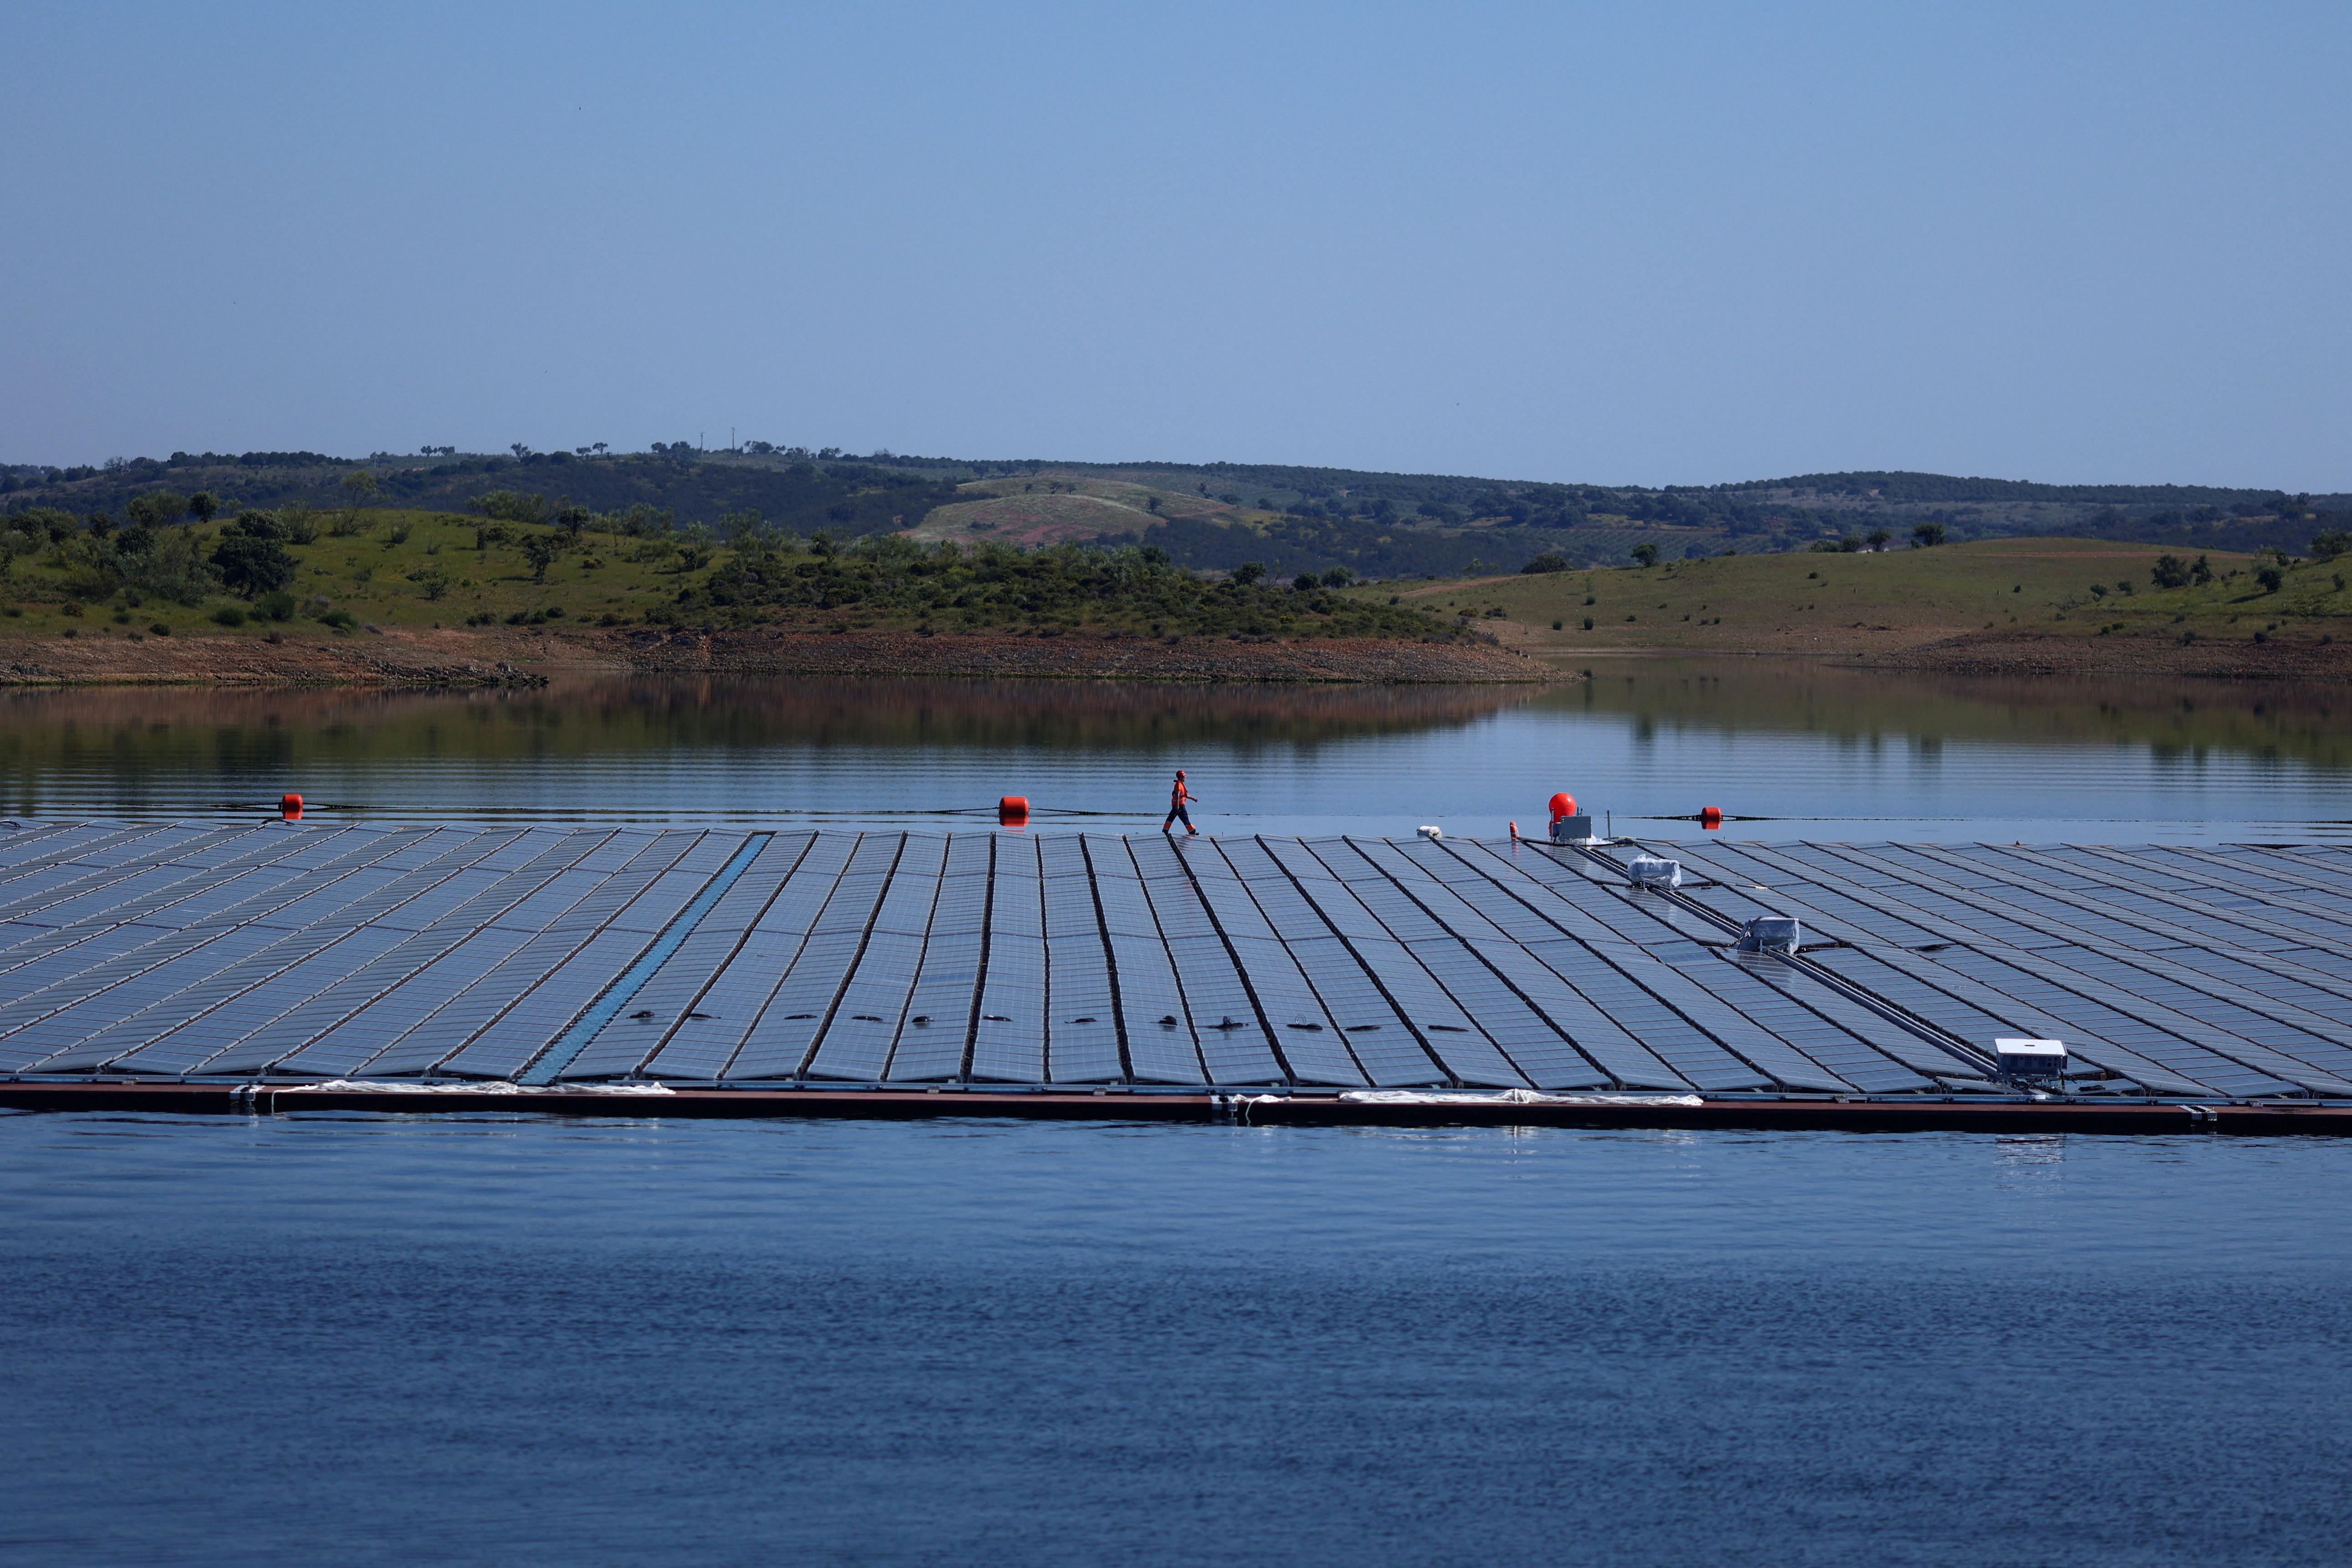 Portugal's EDP installs the largest floating solar farm on a dam in Europe, on the surface of Alqueva dam